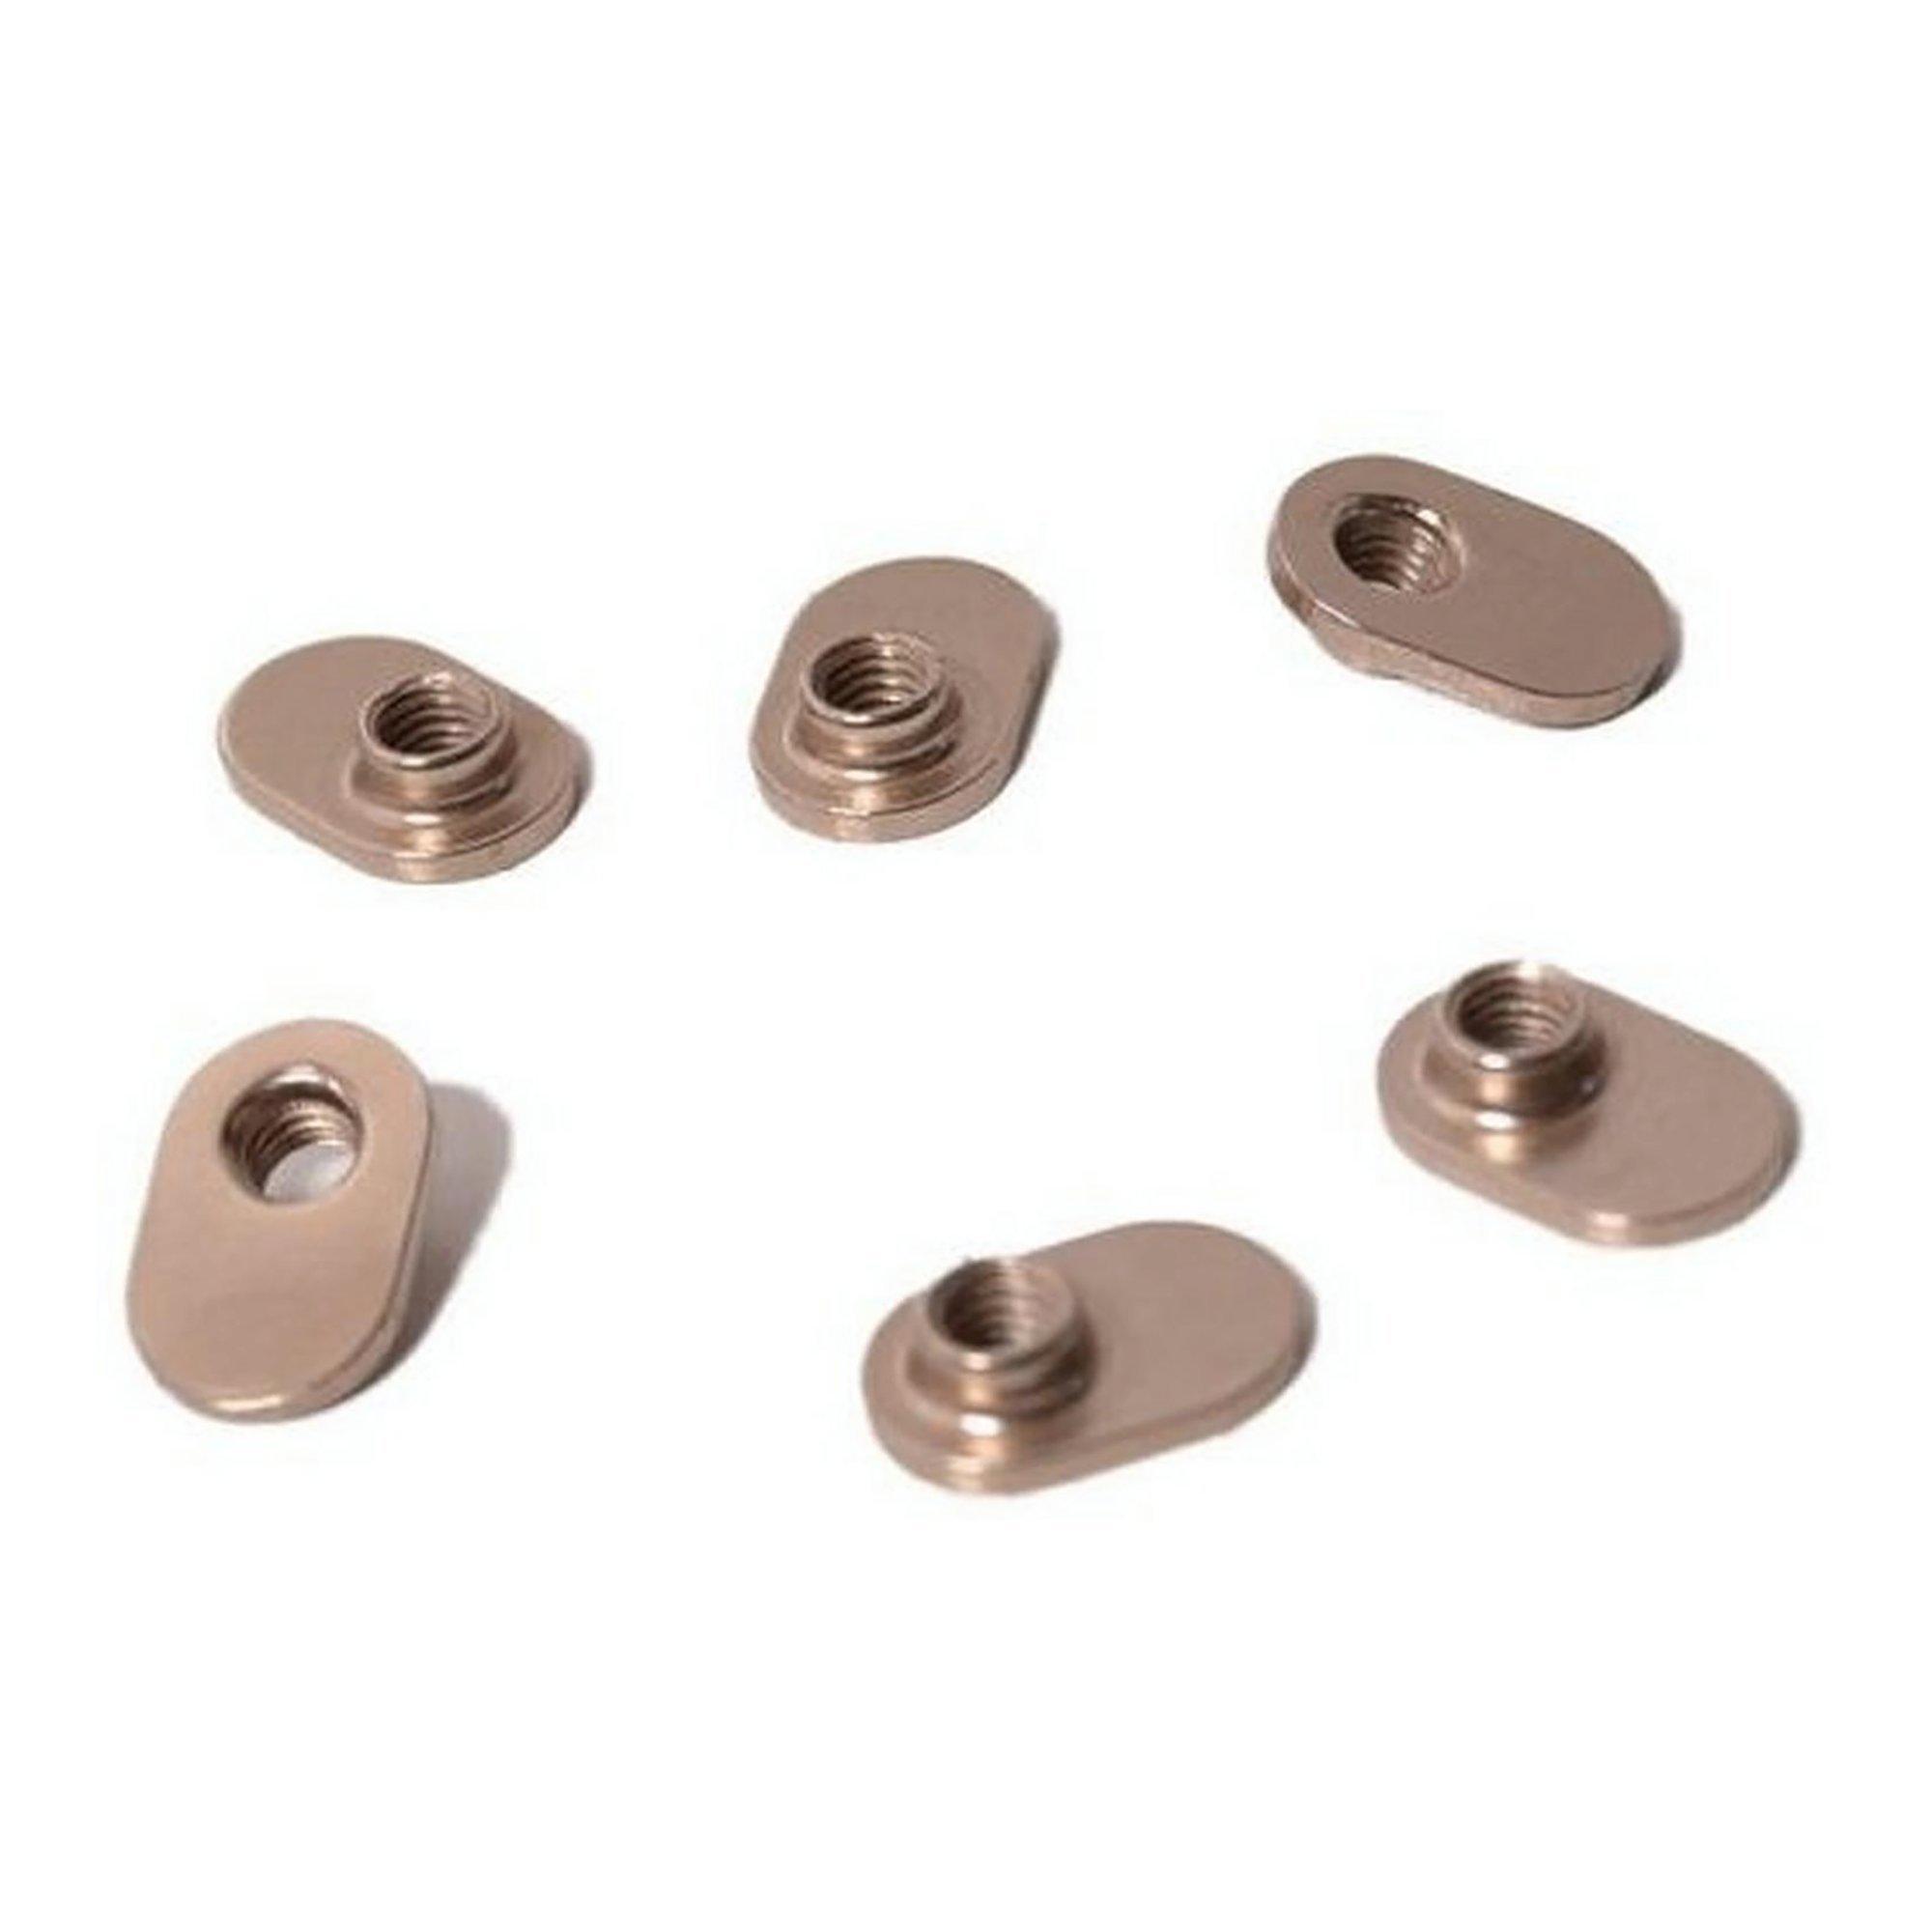 S-Works 6 and Sub6 Replacement Ti/Alloy T-Nuts | www.specialized.com